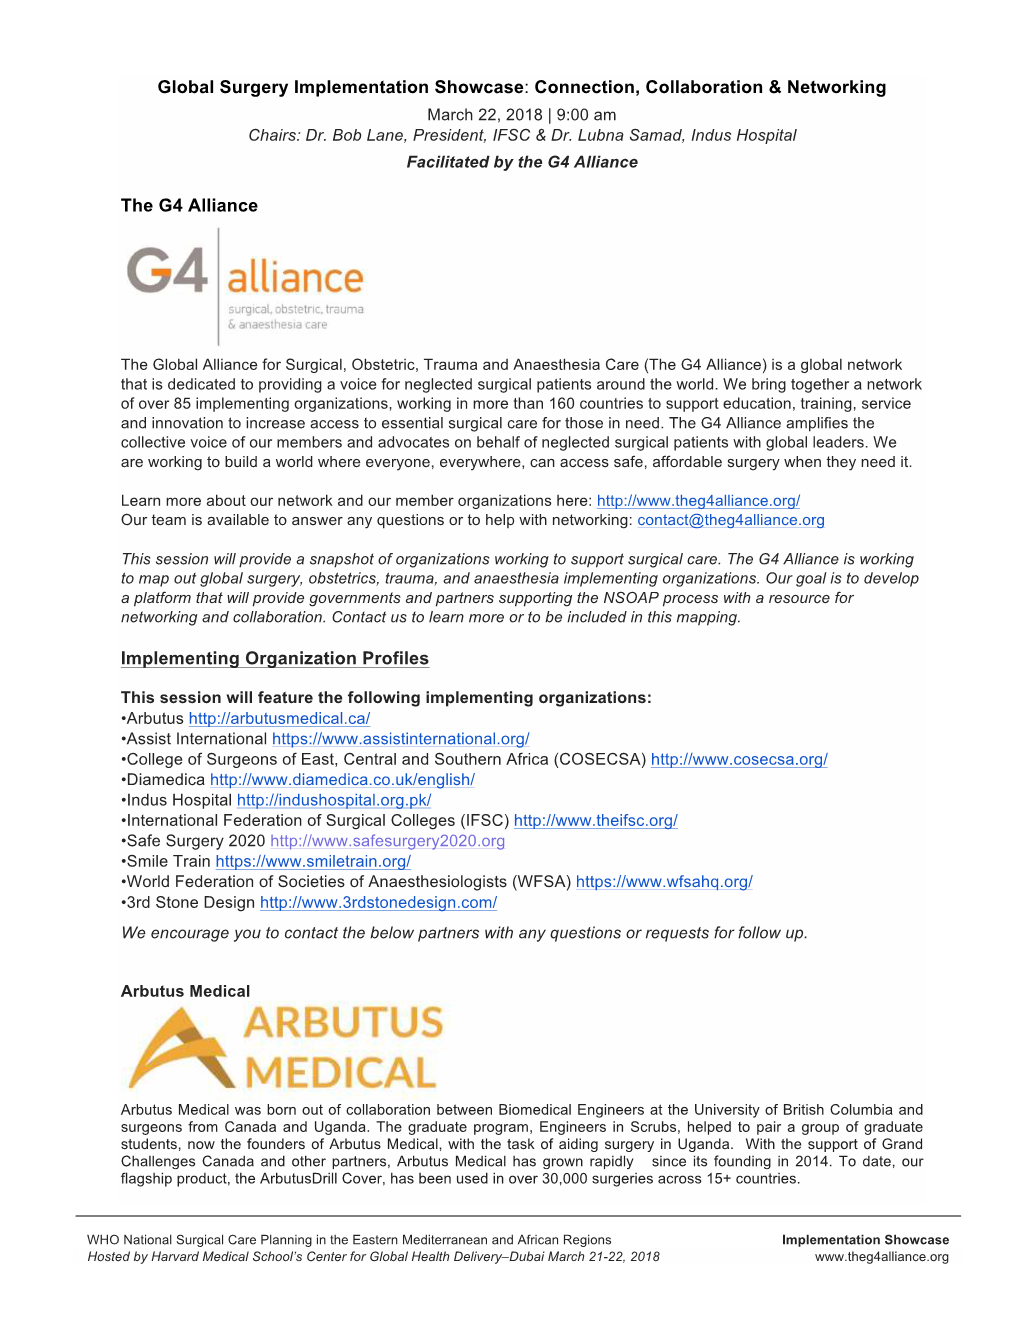 Global Surgery Implementation Showcase: Connection, Collaboration & Networking the G4 Alliance Implementing Organization